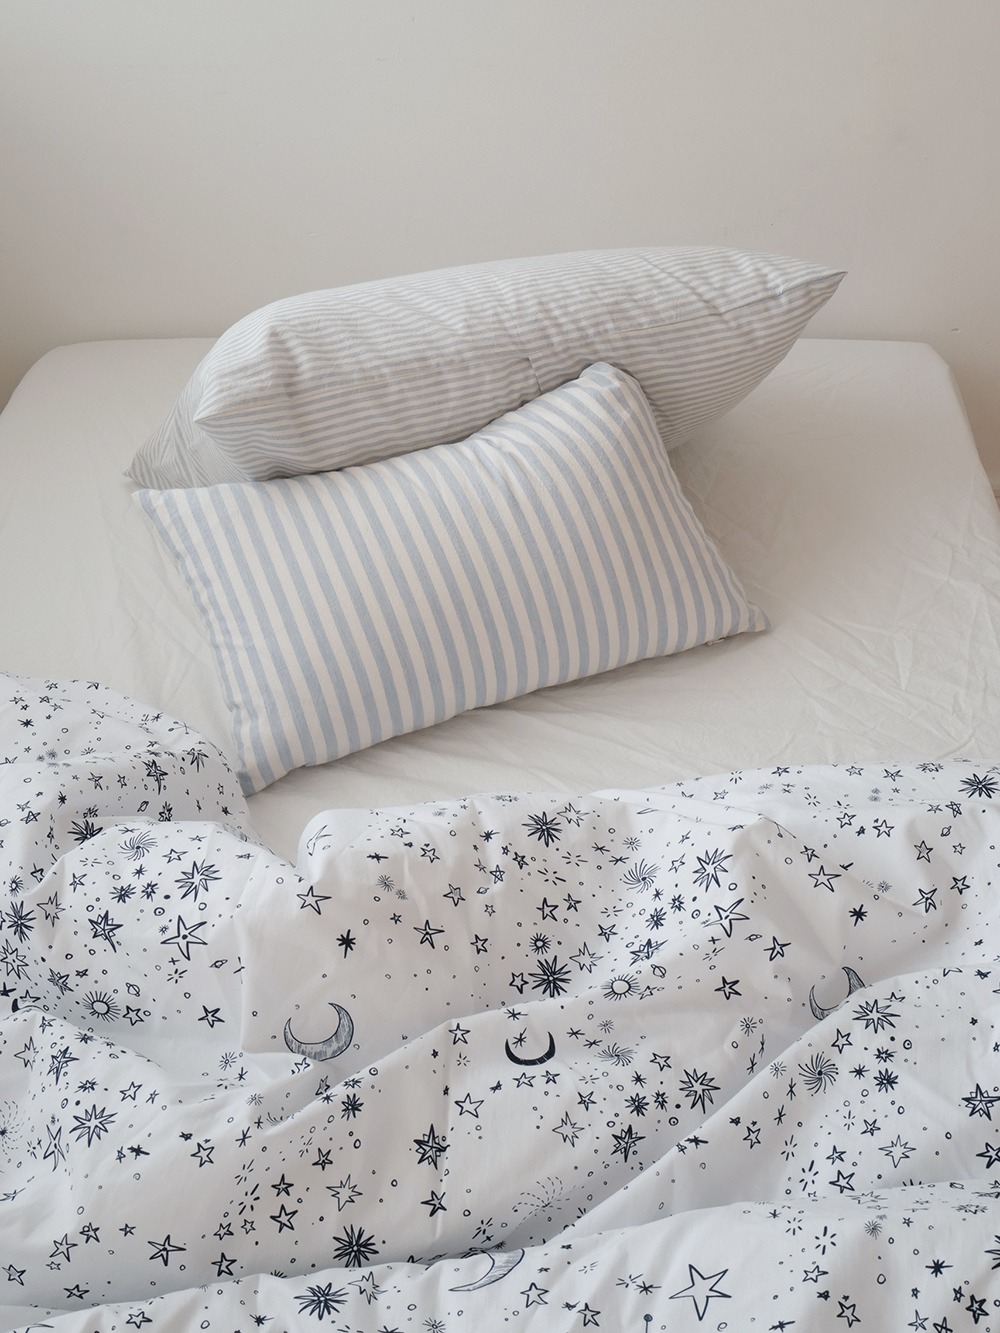 Dreaming bedding